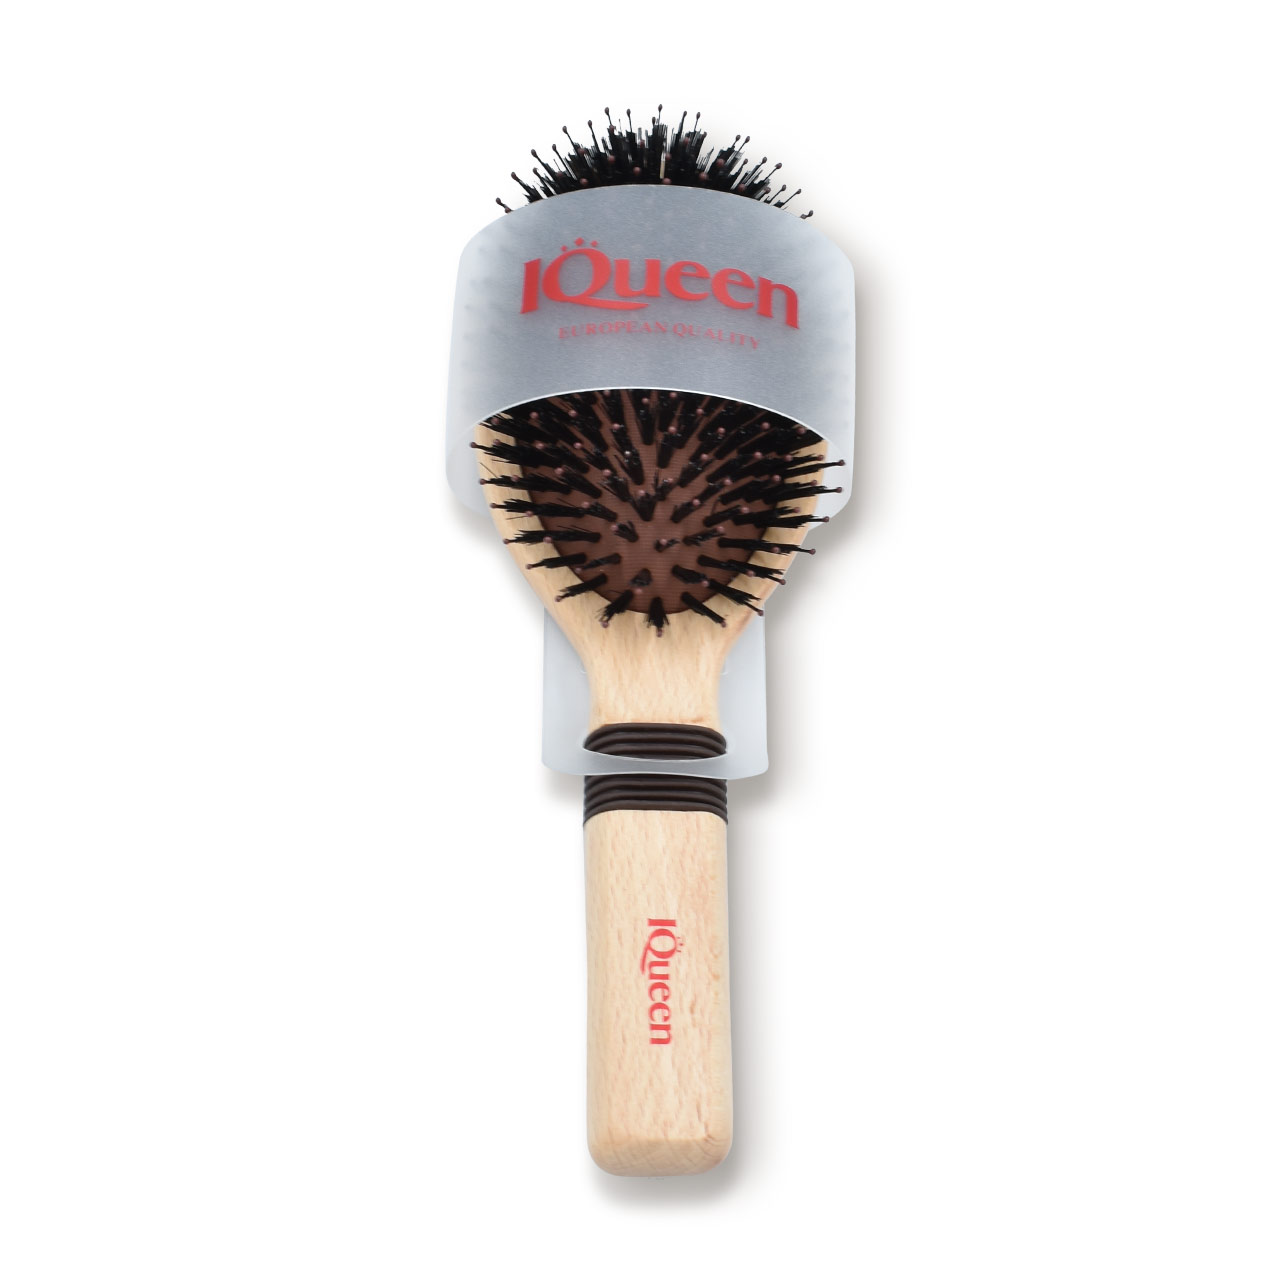 31-6294011581168-IQ-58116 IQUEEN LARGE OVAL CUSHION BRUSH-2